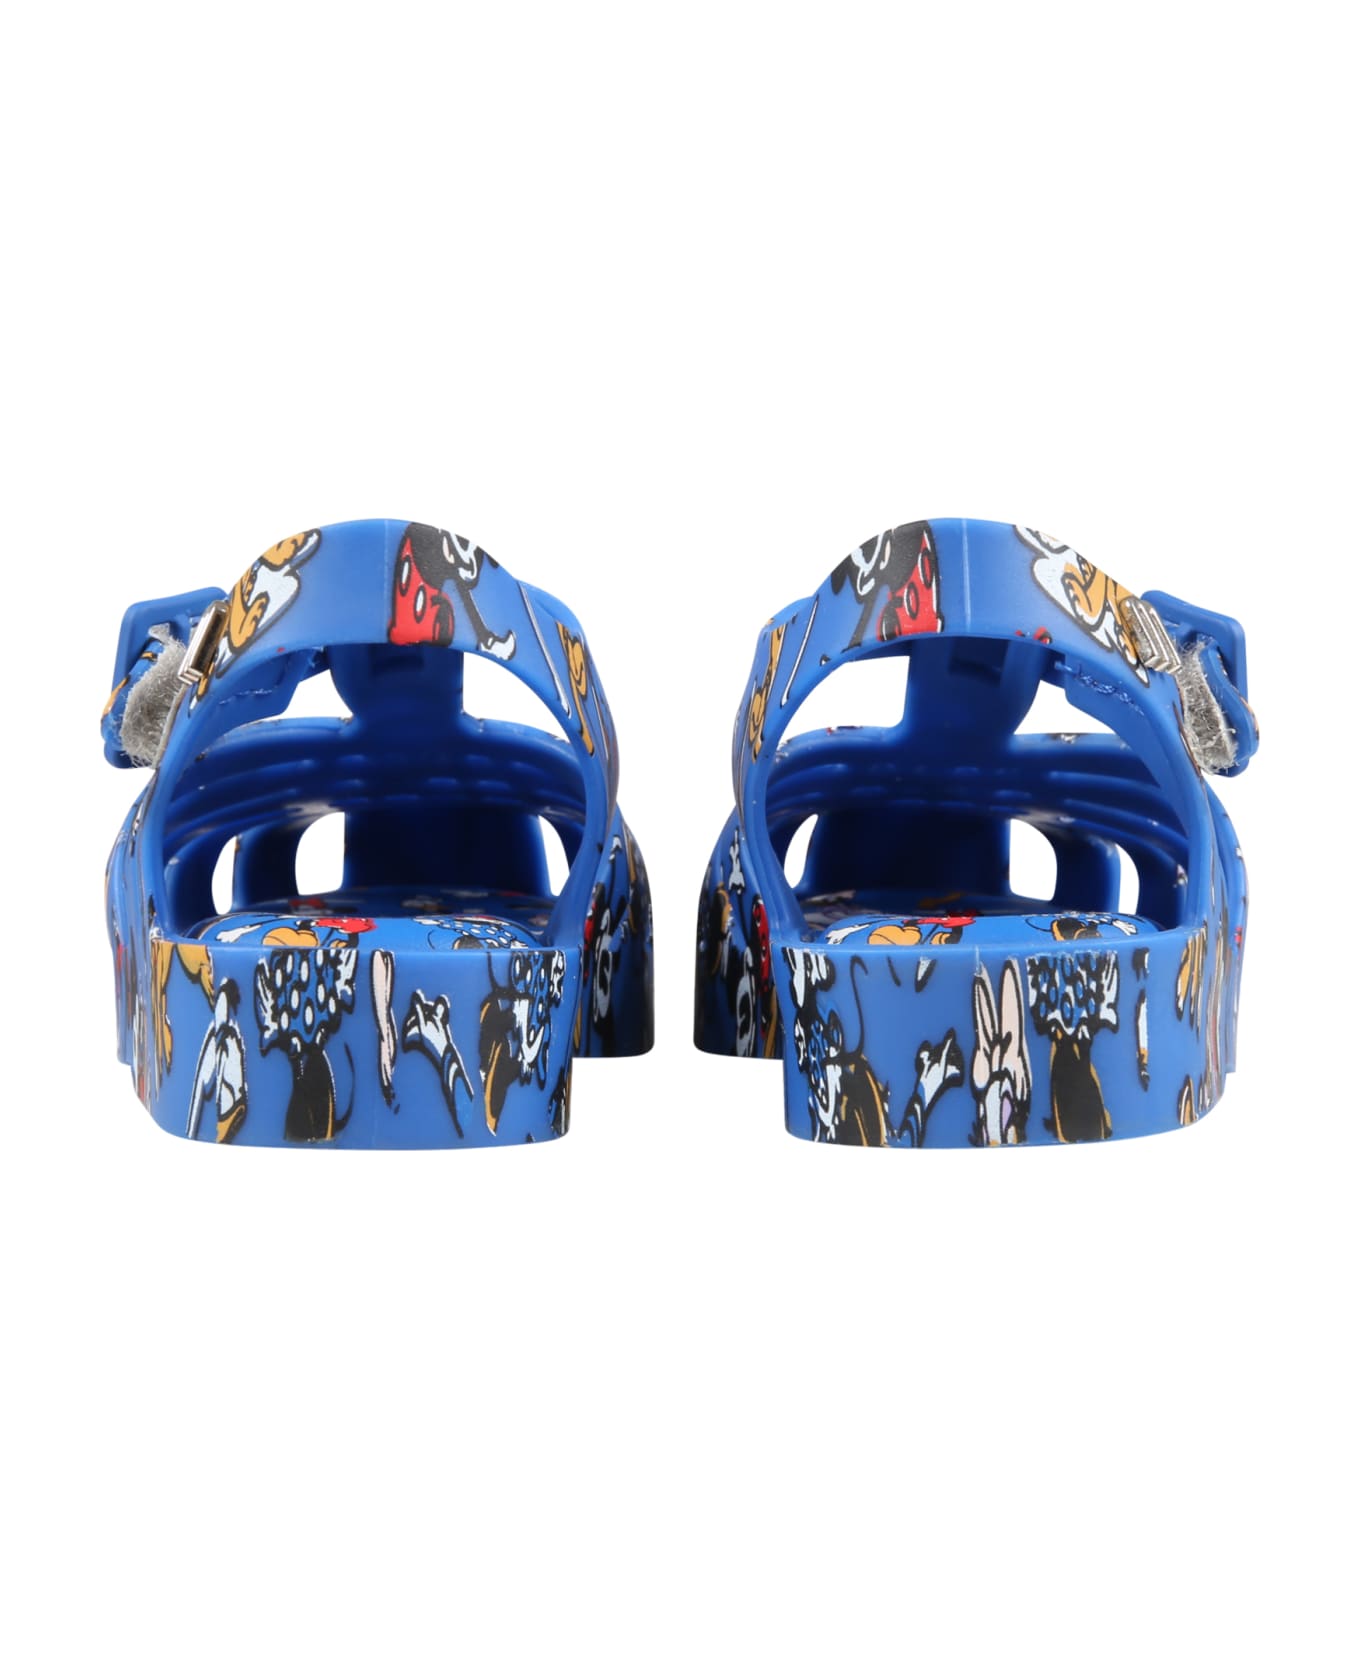 Melissa Blue Sandals For Boy With Disney Characters - Blue シューズ